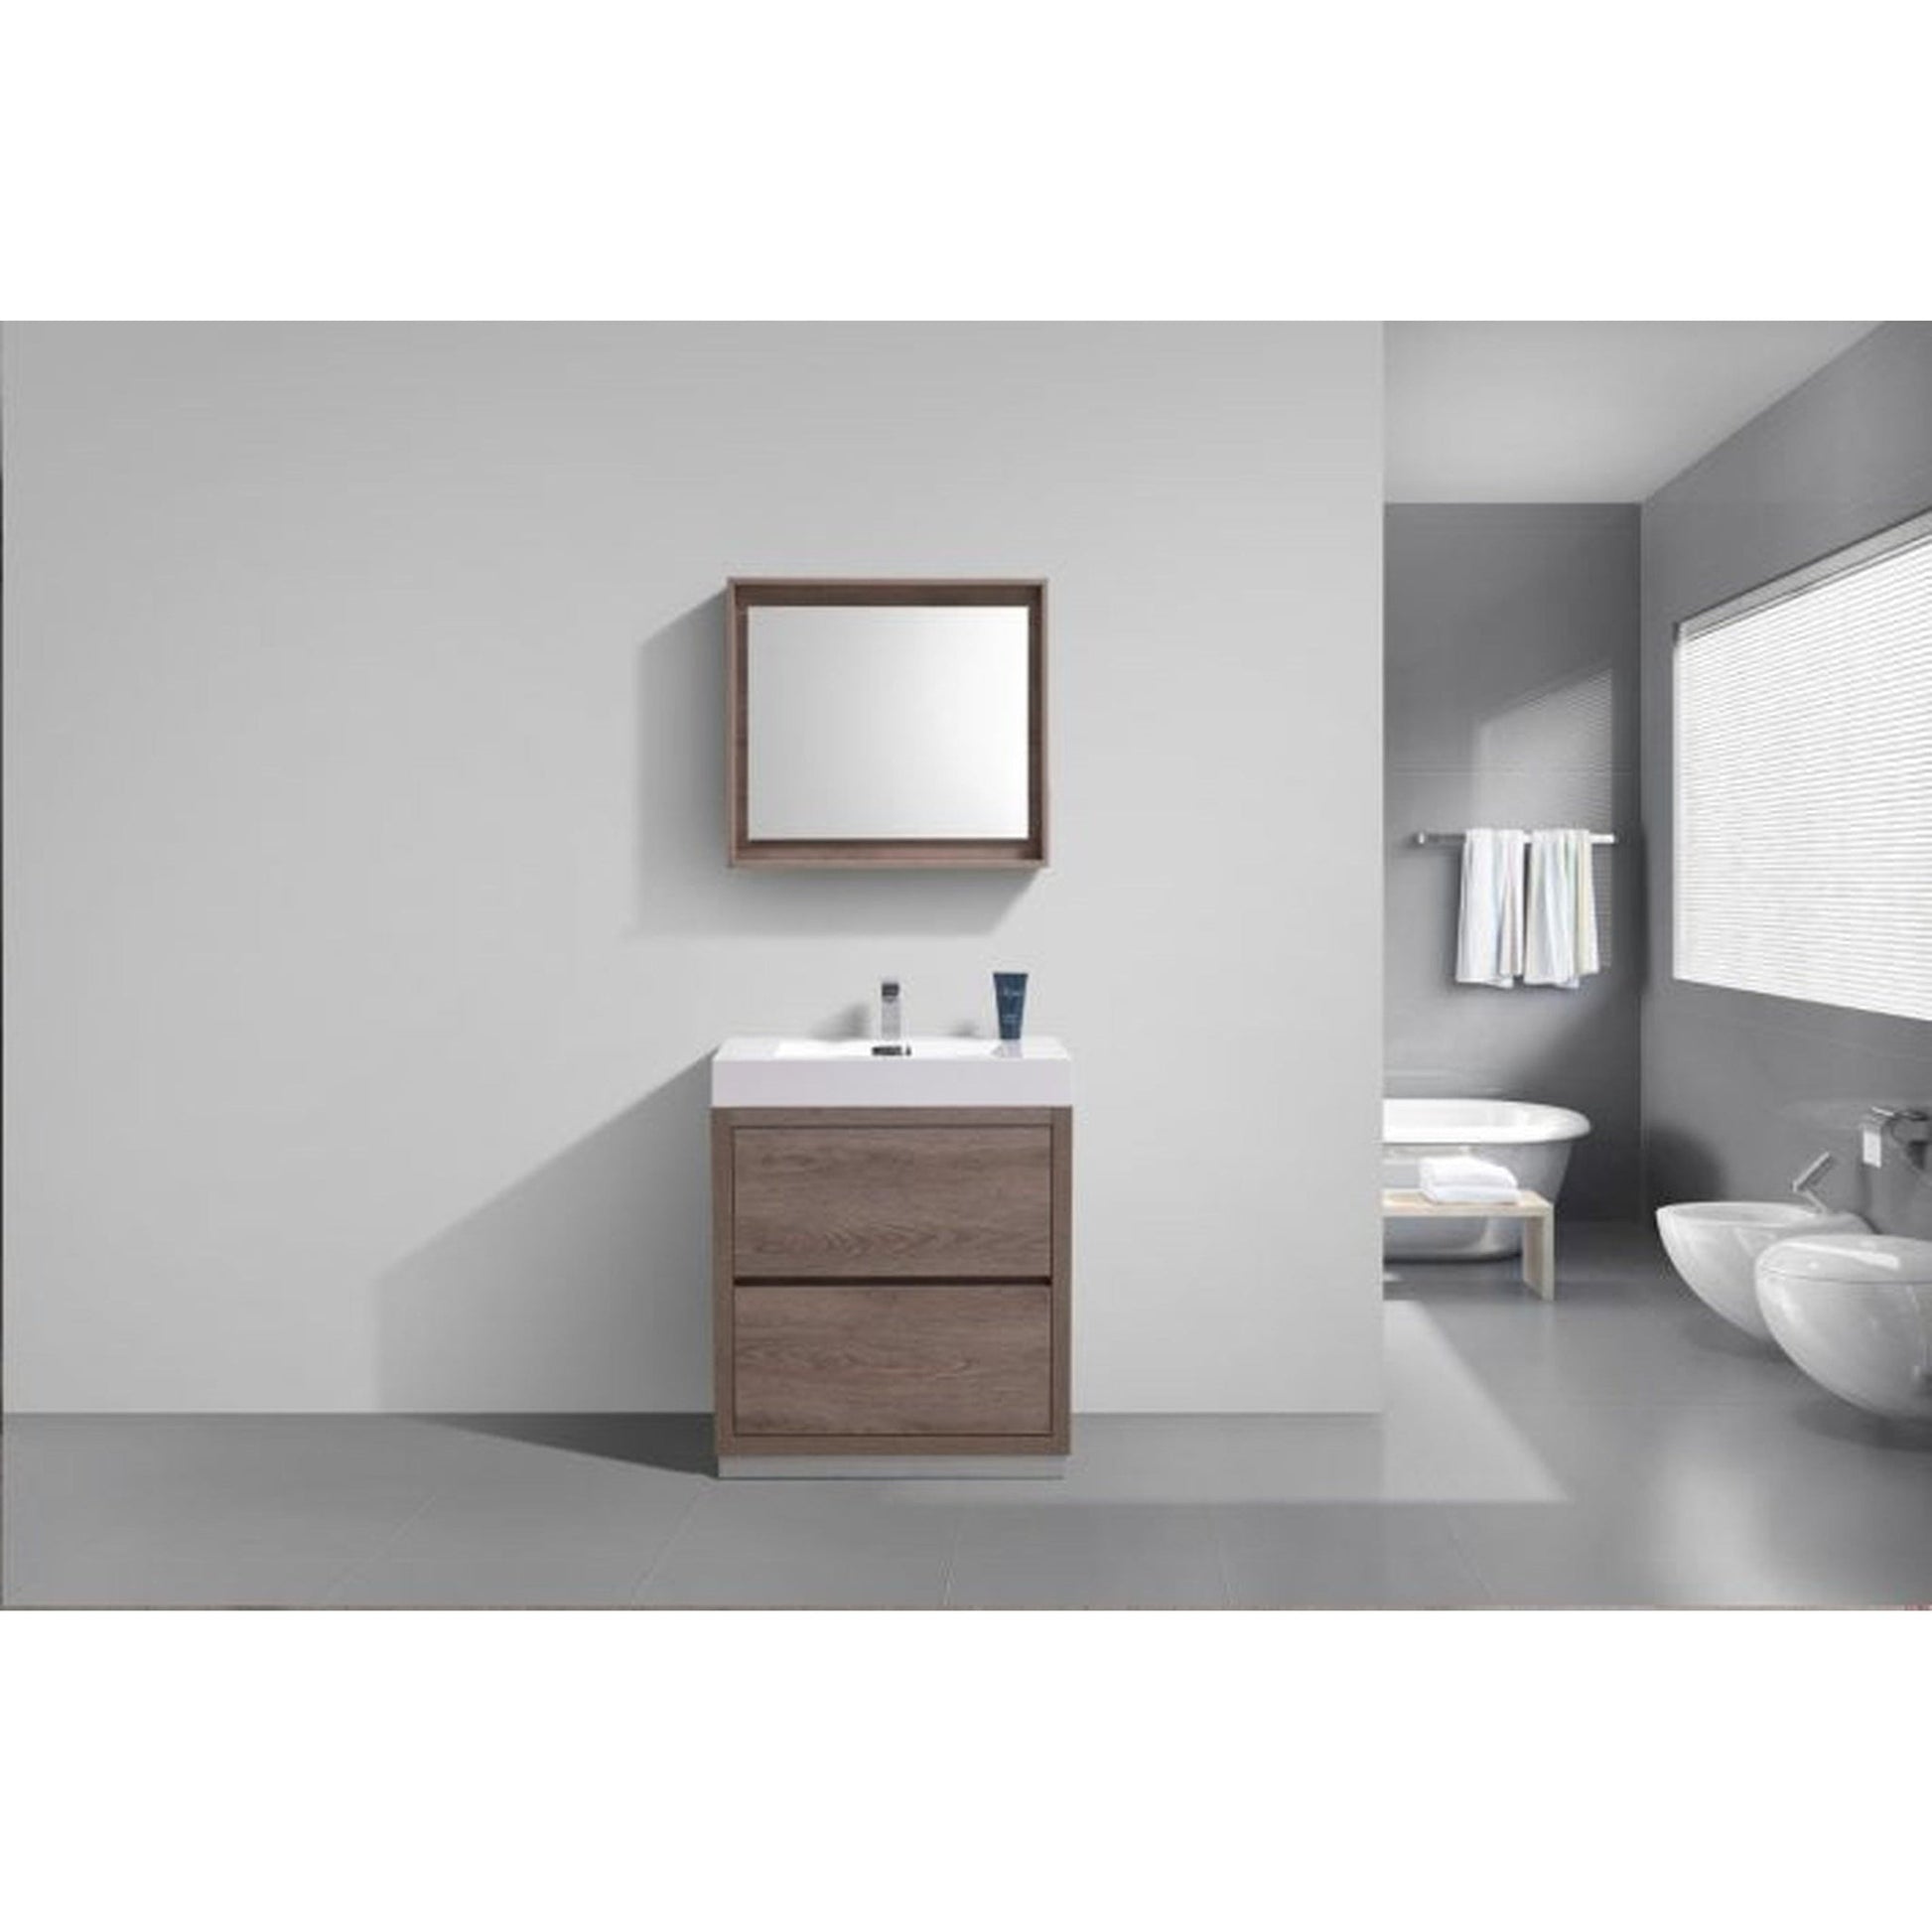 KubeBath Bliss 30" Butternut Freestanding Modern Bathroom Vanity With Single Integrated Acrylic Sink With Overflow and 30" Butternut Framed Mirror With Shelf